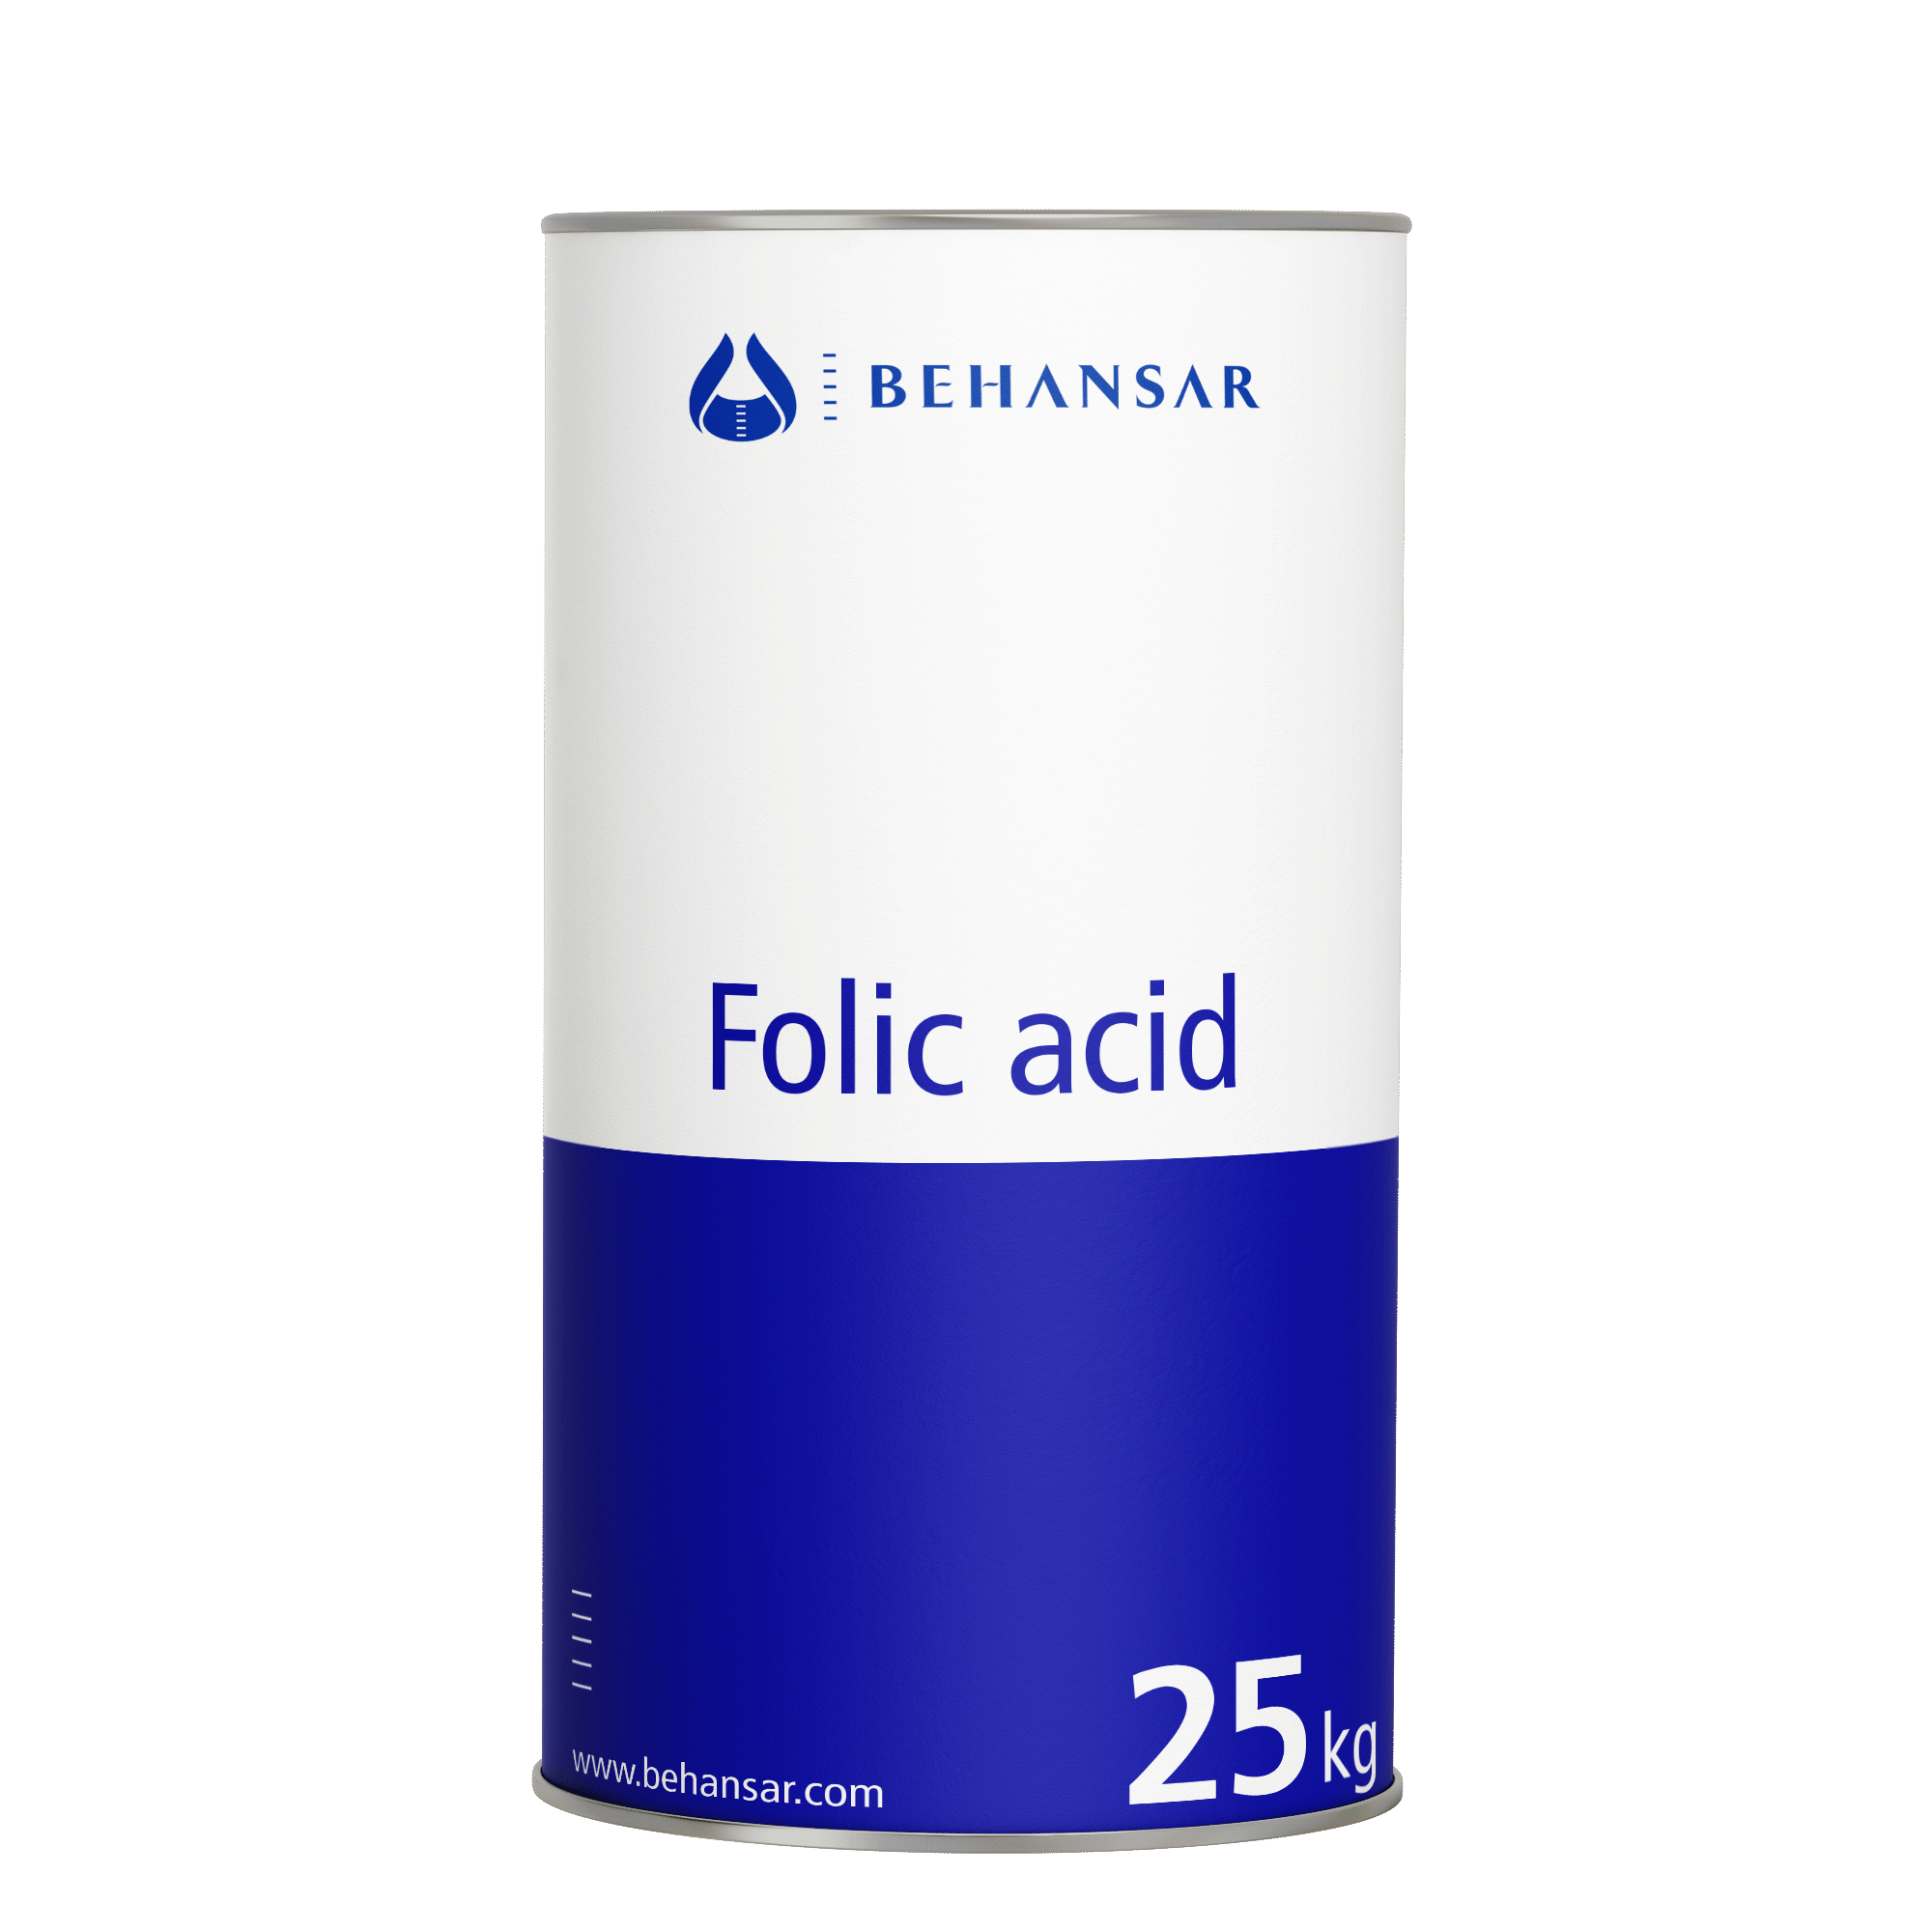 Folic acid is one of the products of Behansar Co